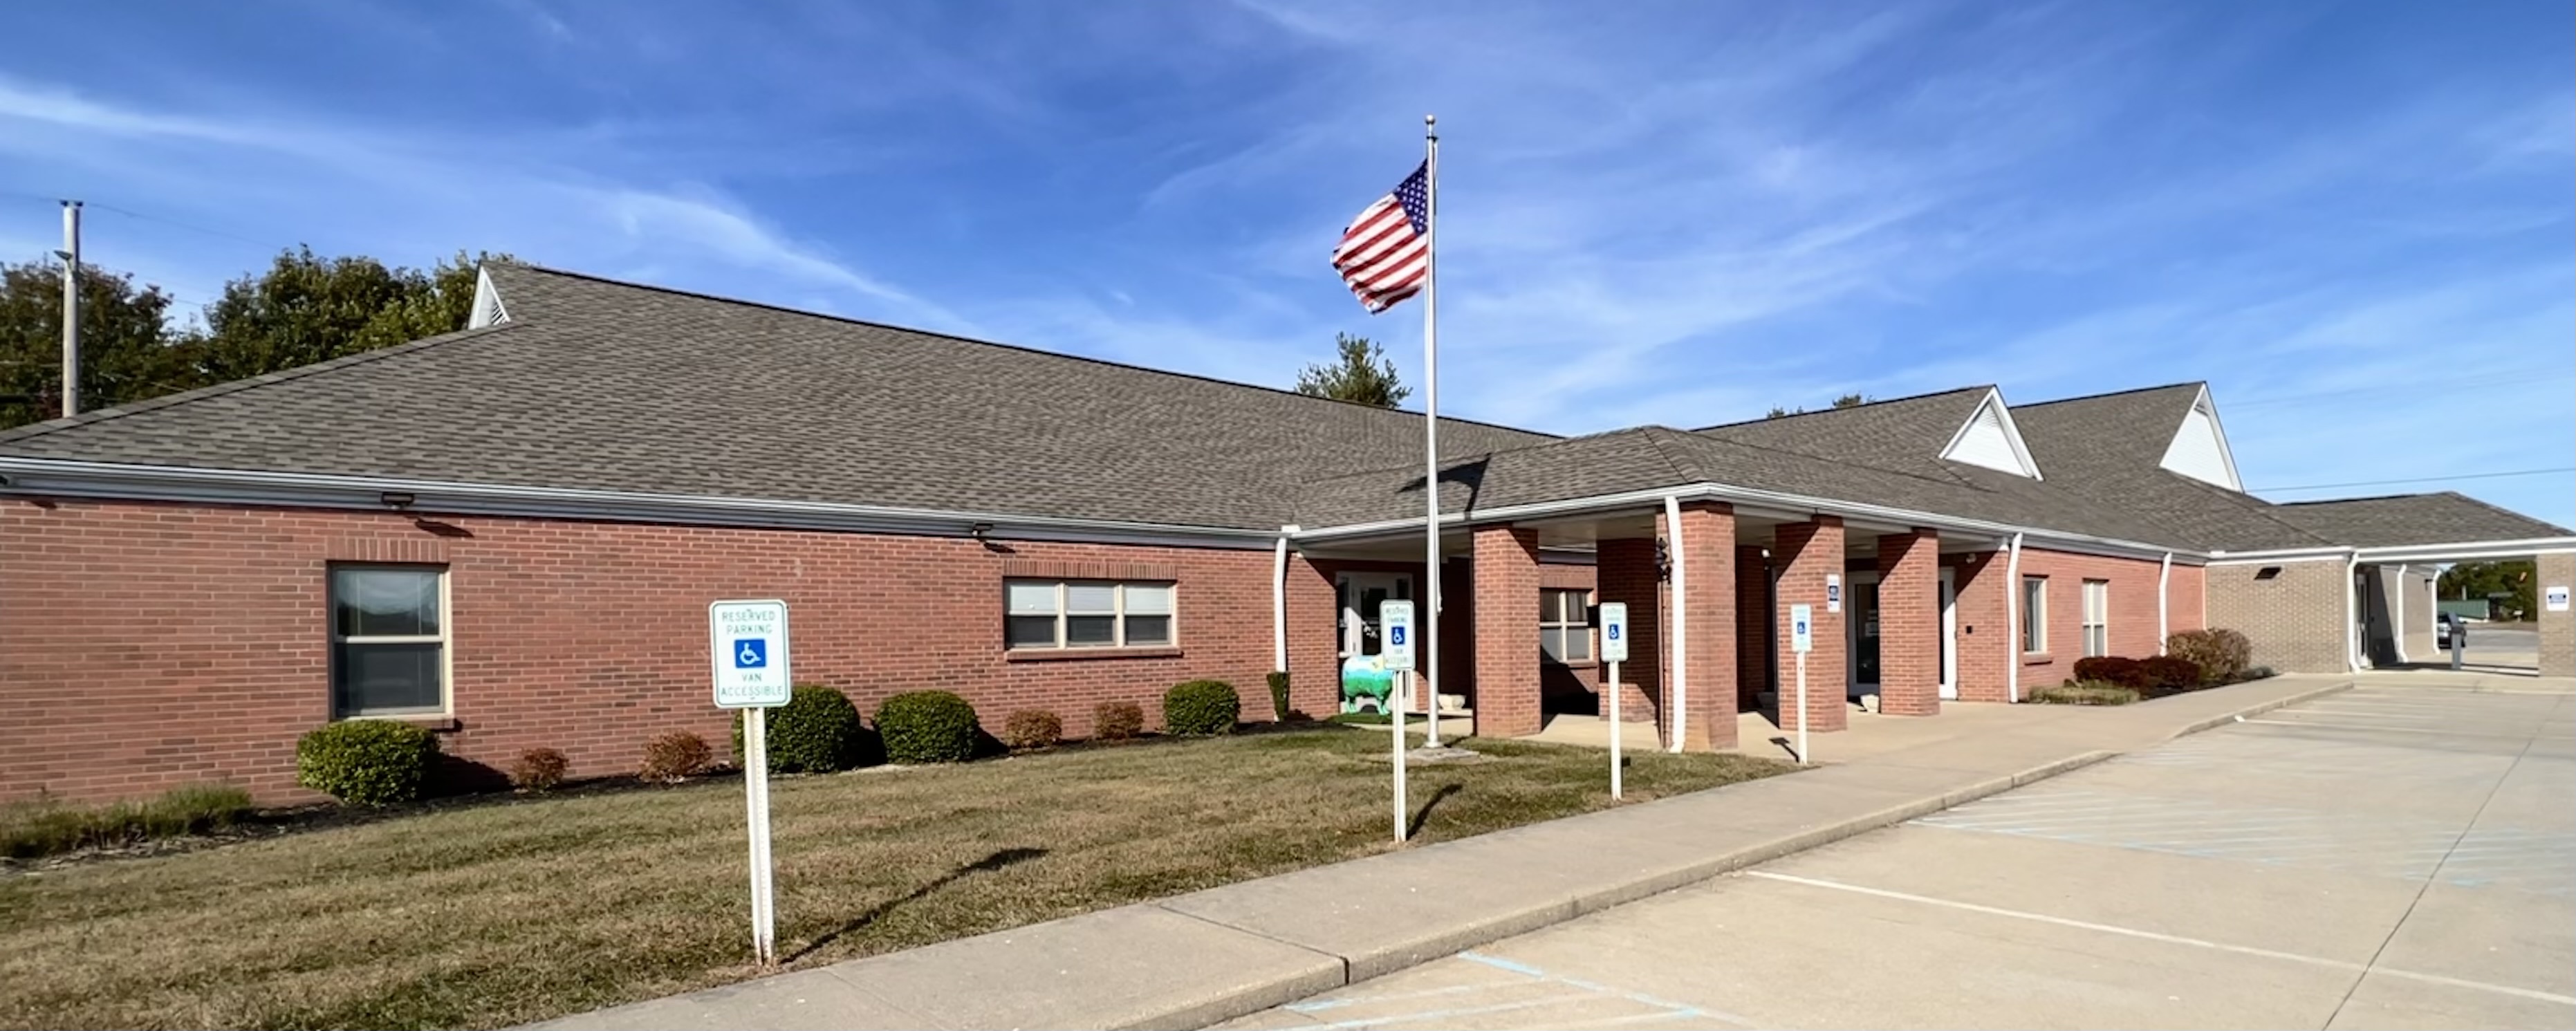 Pendleton County Extension Office Building